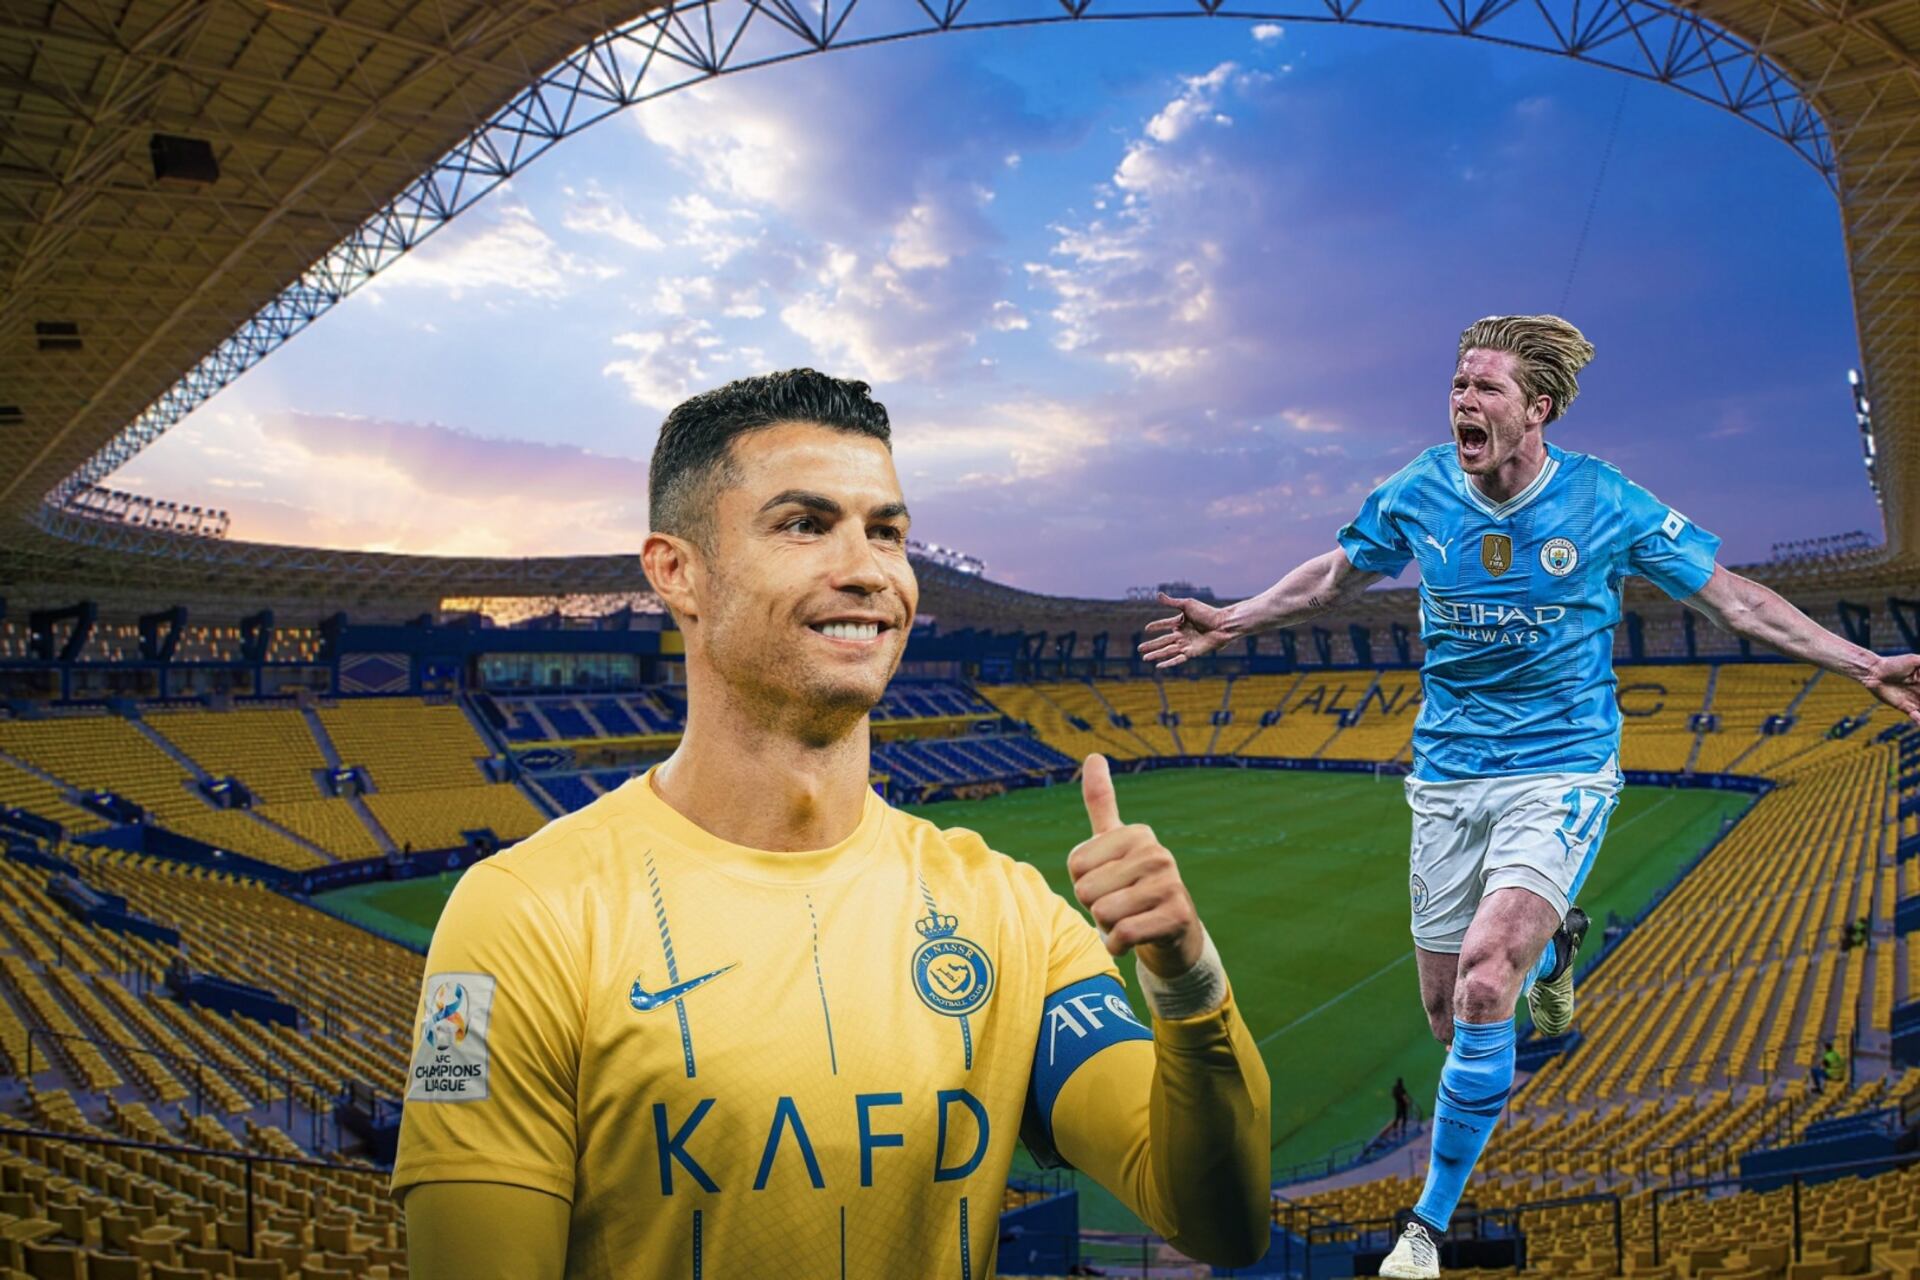 Cristiano could've asked for Kevin De Bruyne as a way to stay at Al Nassr, they would offer this millionaire salary